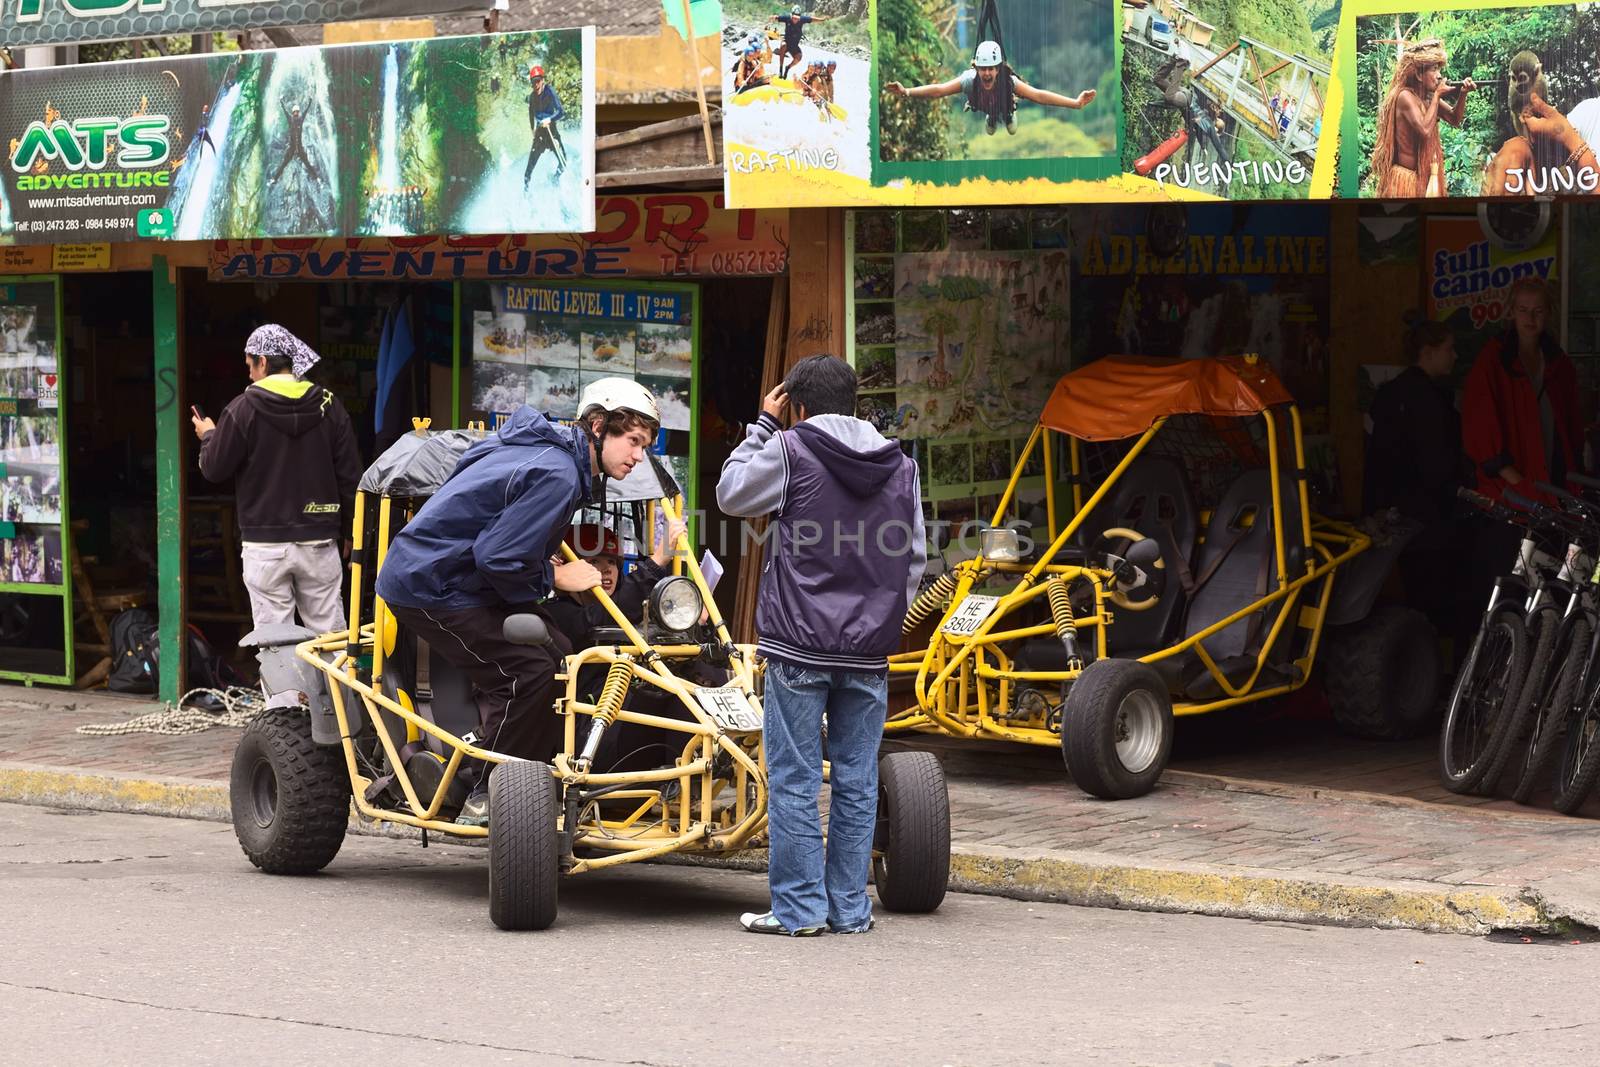 BANOS, ECUADOR - FEBRUARY 25, 2014: Unidentified people in and at a buggy in front of a tour operator and vehicle rental on 16 de Diciembre Street on February 25, 2014 in Banos, Ecuador. Banos is a small touristy town, which is mainly visited for its outdoor activities, such as bridge jumping, canyoning, kayaking, and so on. There are also various places to rent bikes, buggies and quads. 